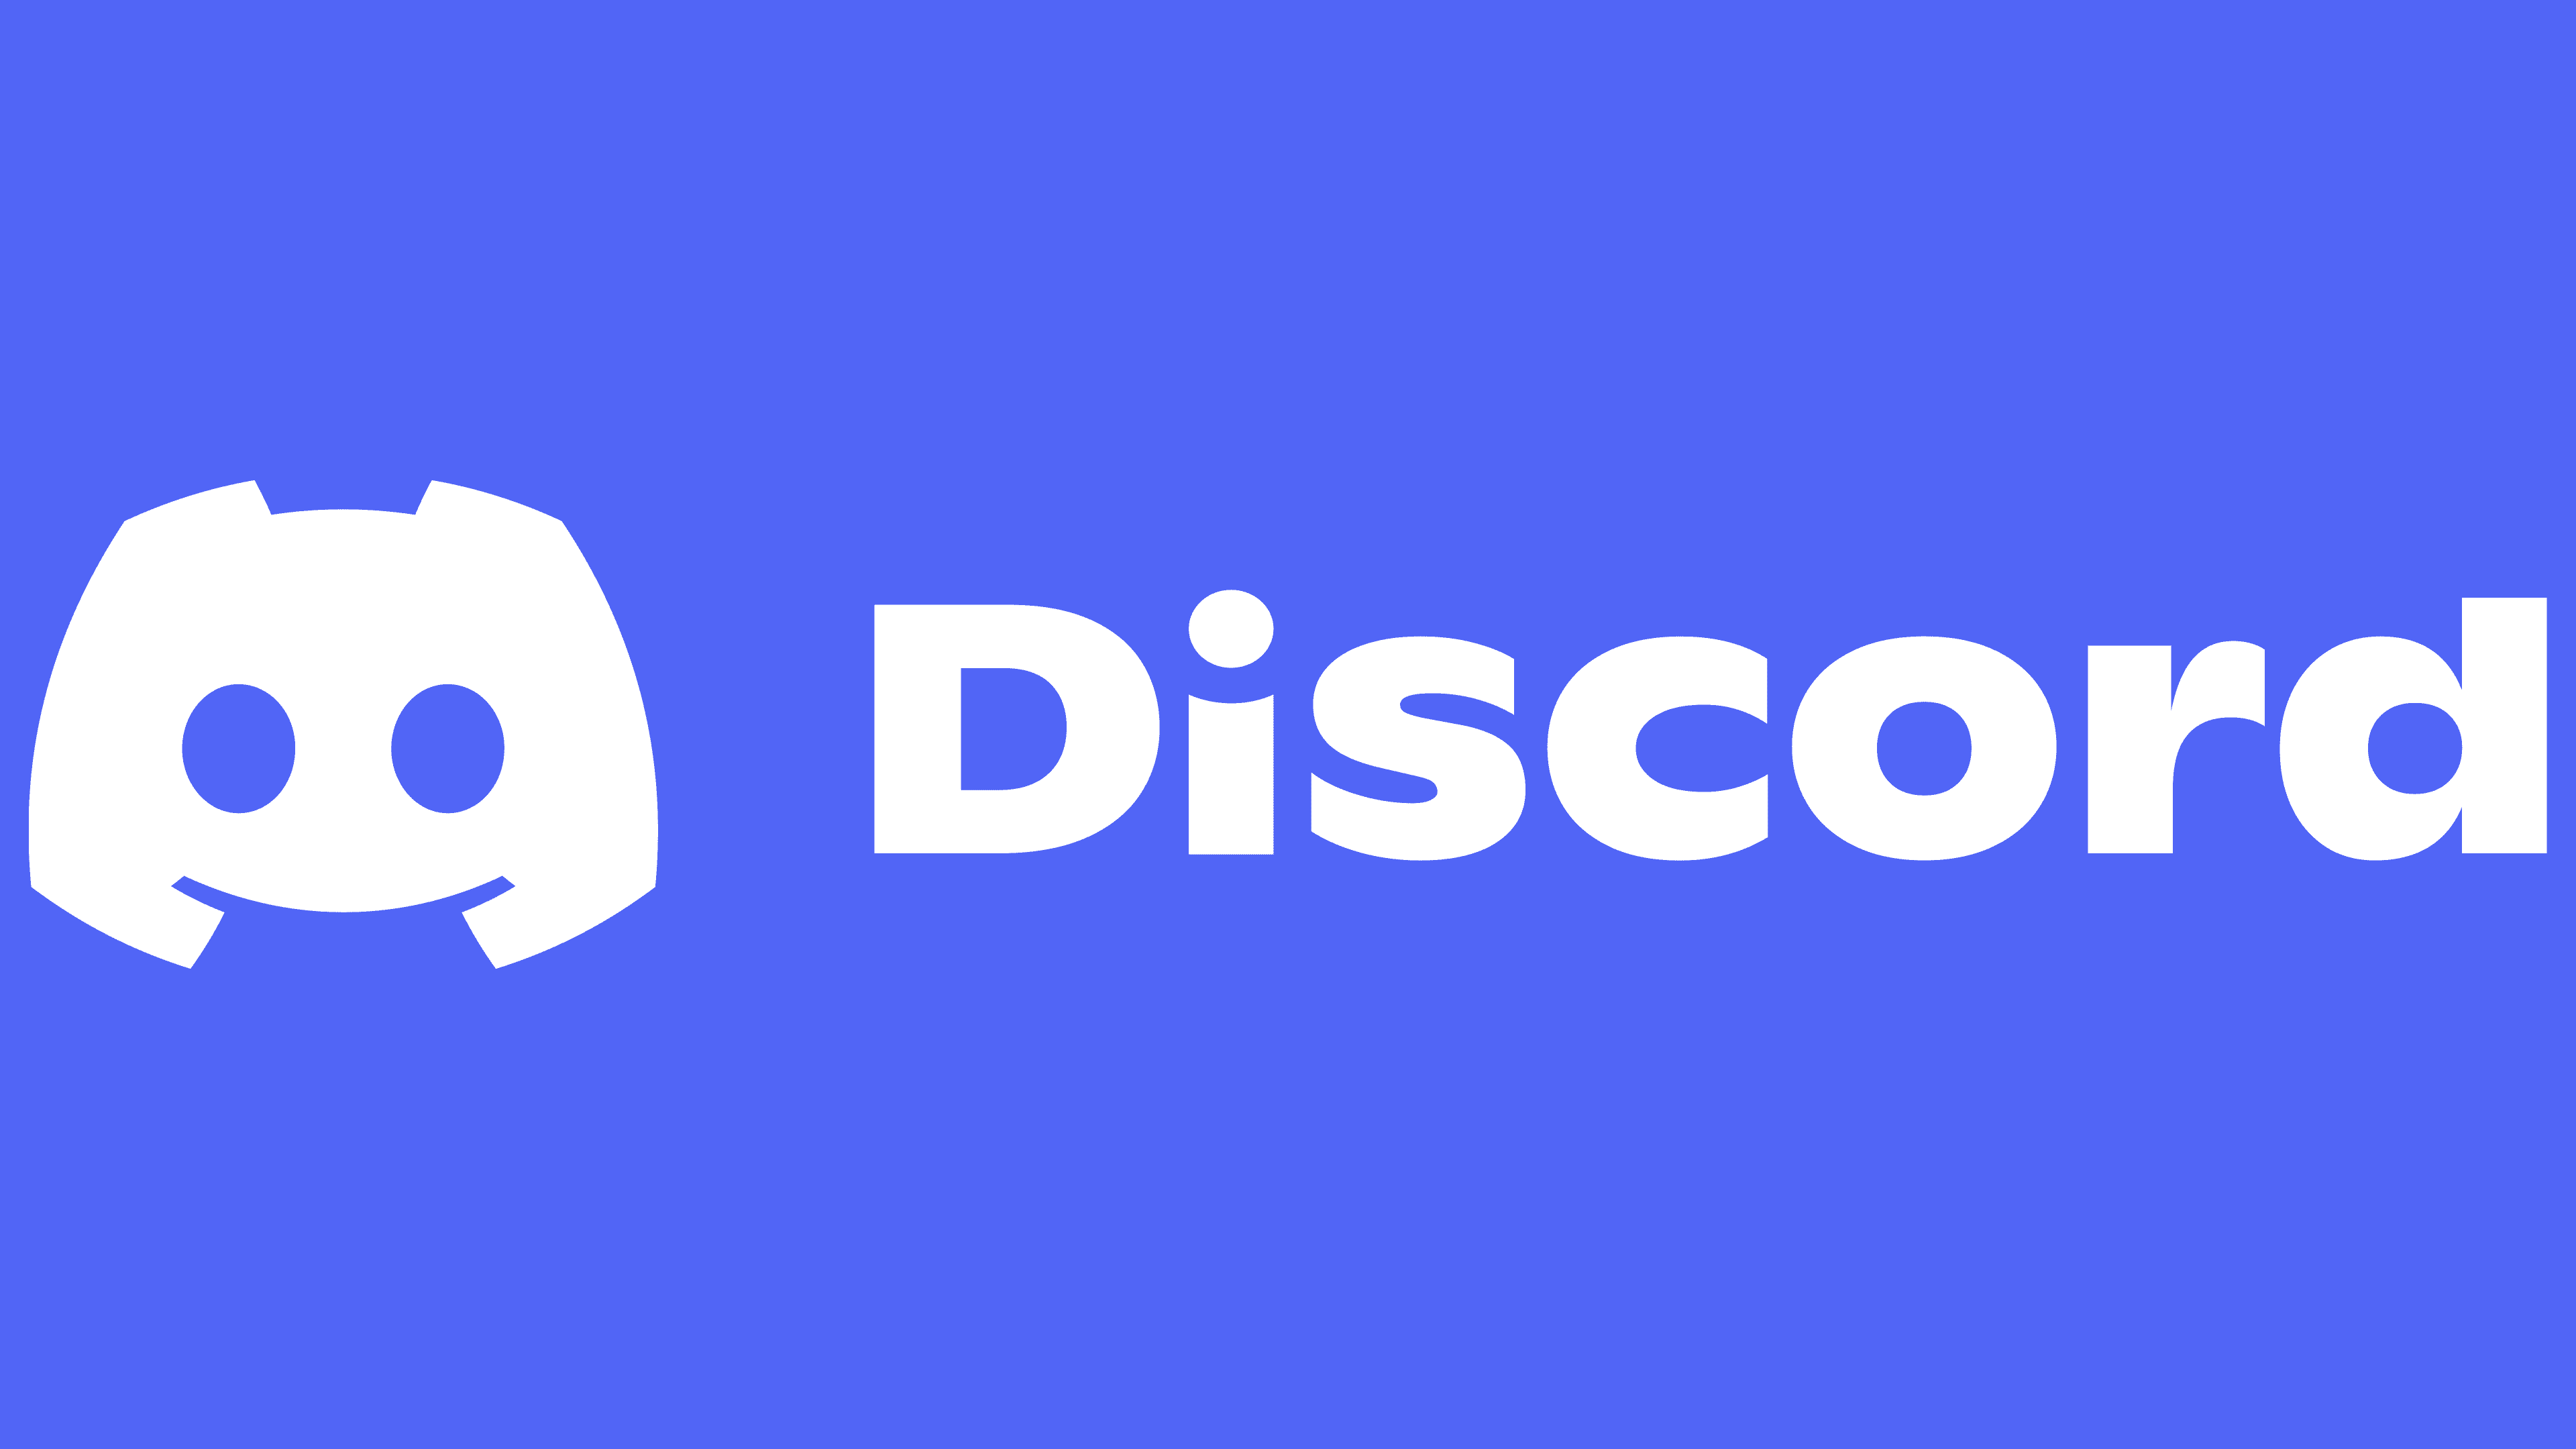 discord sign up with email